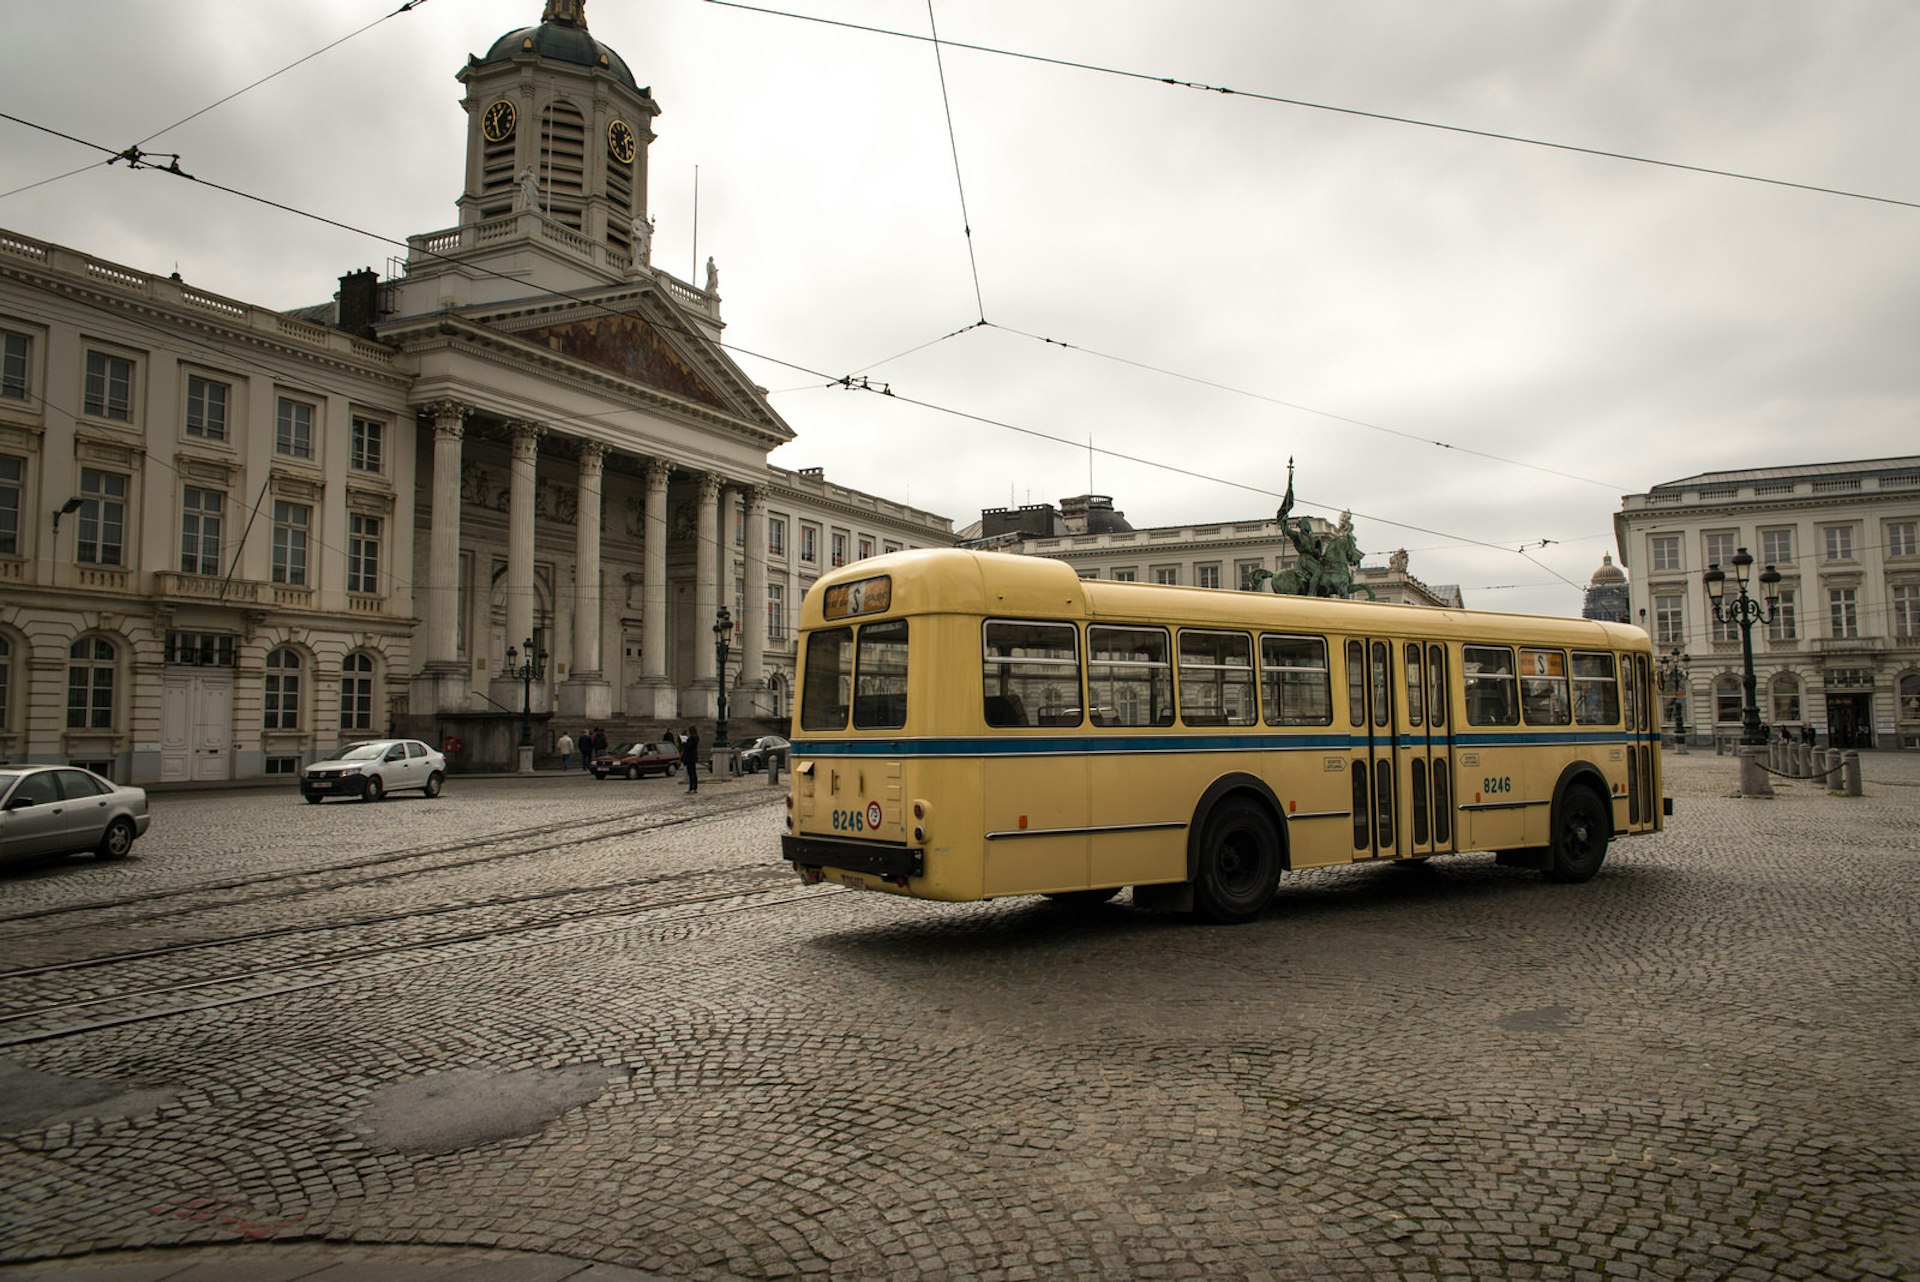 An old-fashioned yellow school bus is parked in a large cobbled square in Brussels with an elegant columned-building in the background on an overcast day